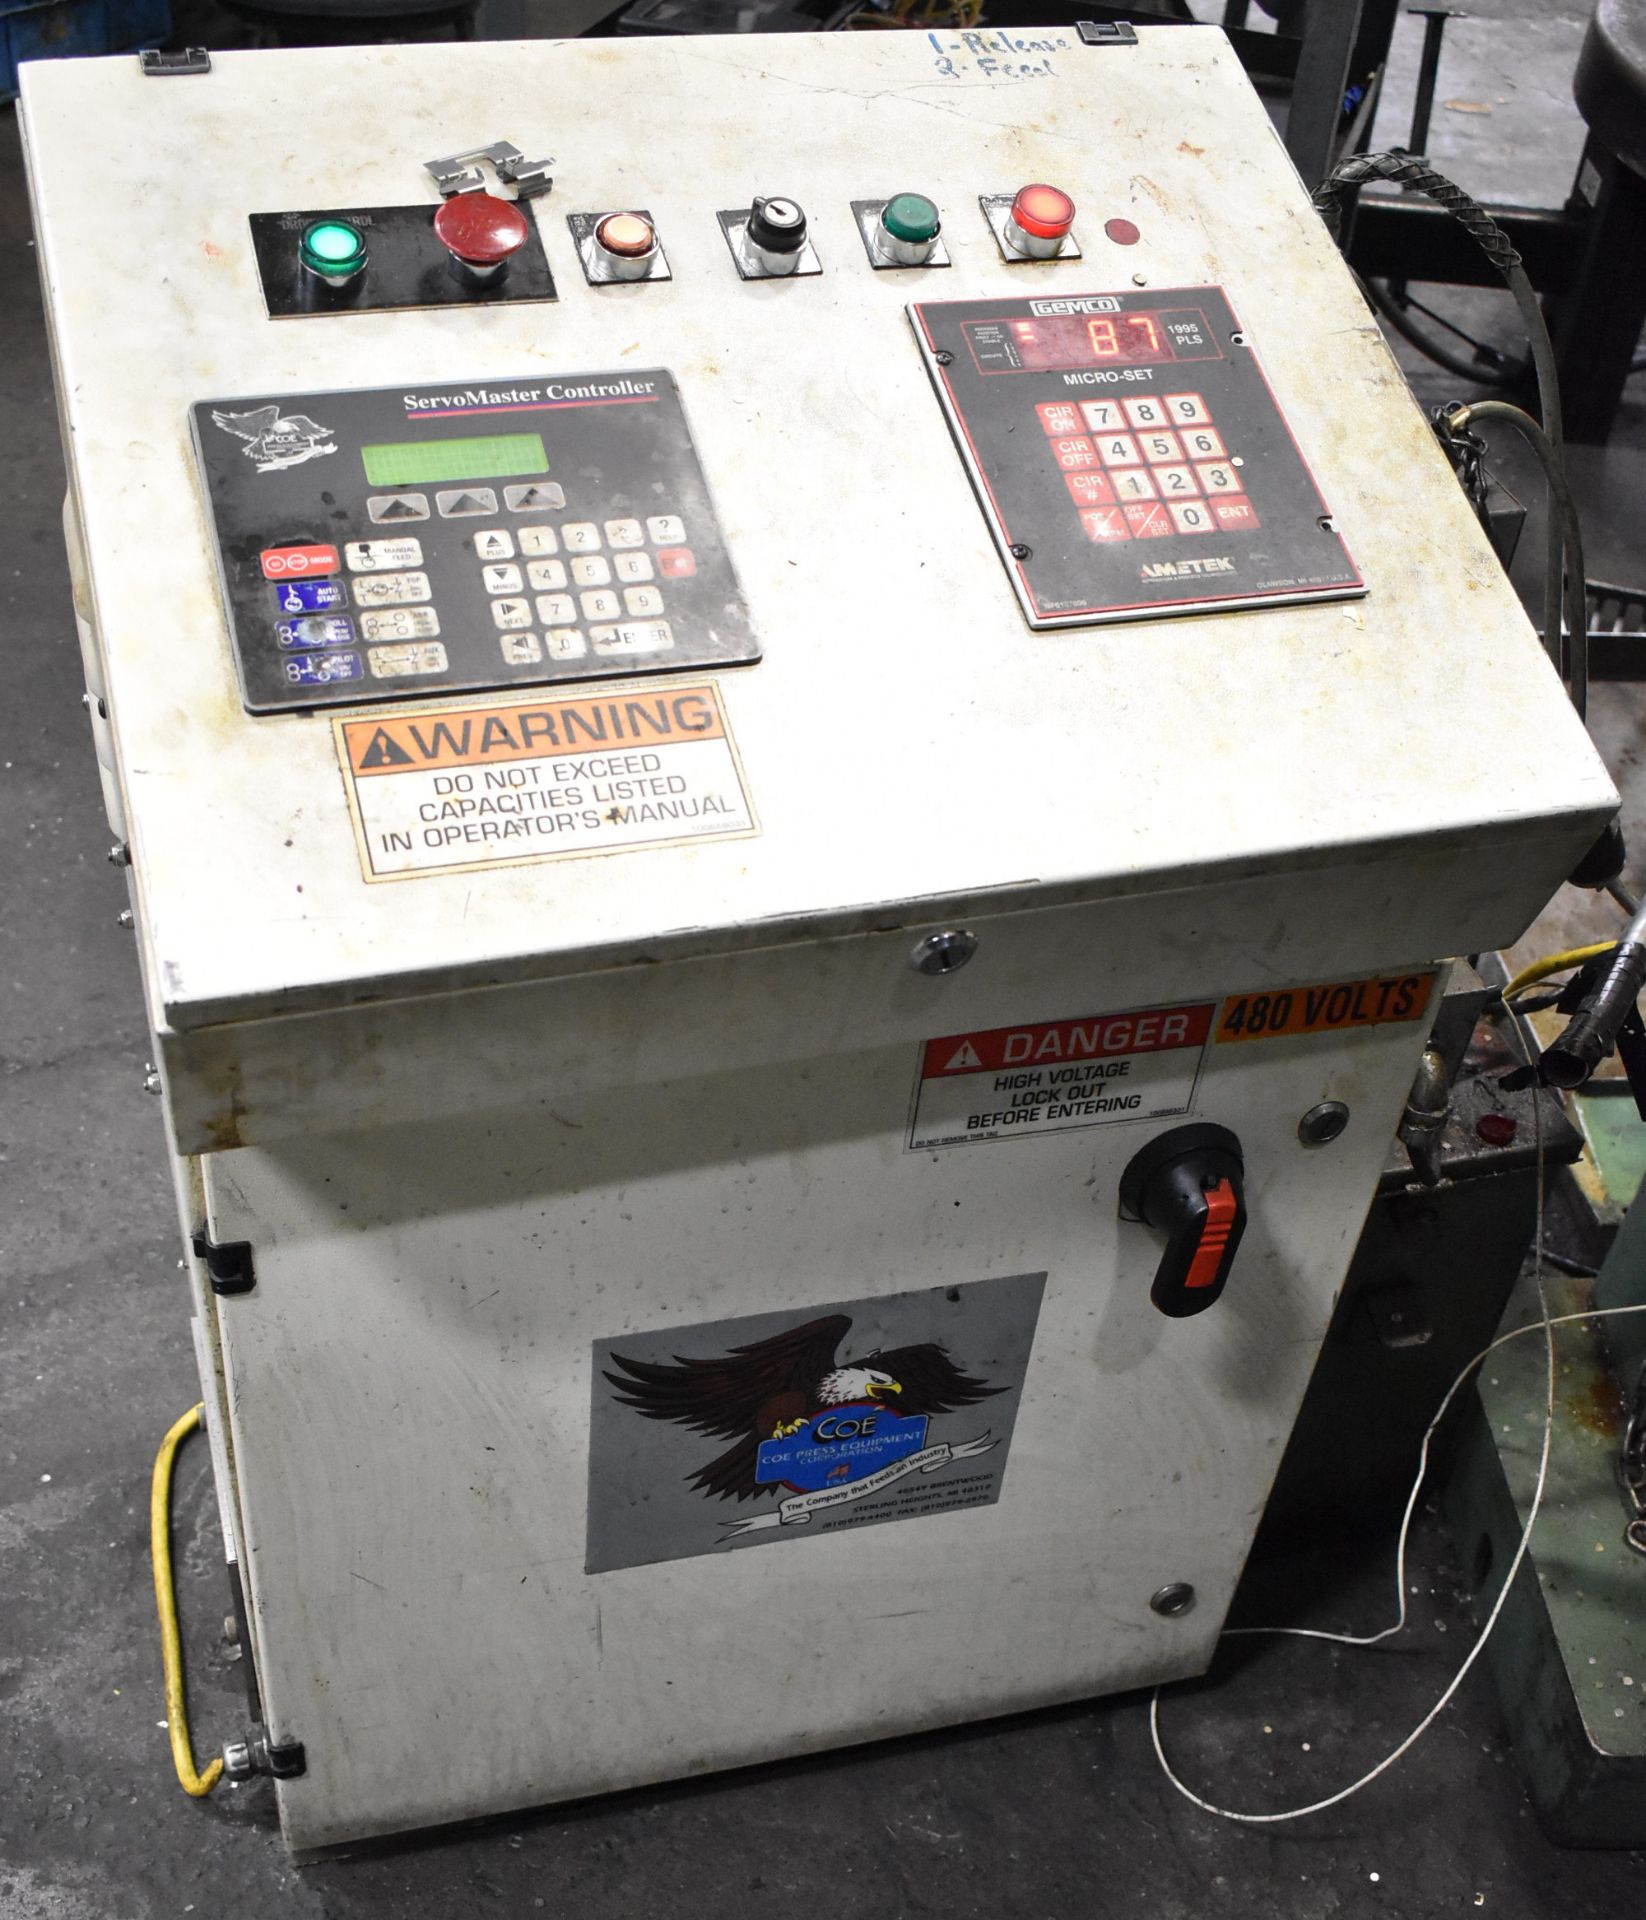 MFG. UNKNOWN PRESS-MOUNTED SERVO FEEDER WITH 25" WIDE CAPACITY, COE SERVOMASTER DIGITAL CONTROL, S/ - Image 4 of 5